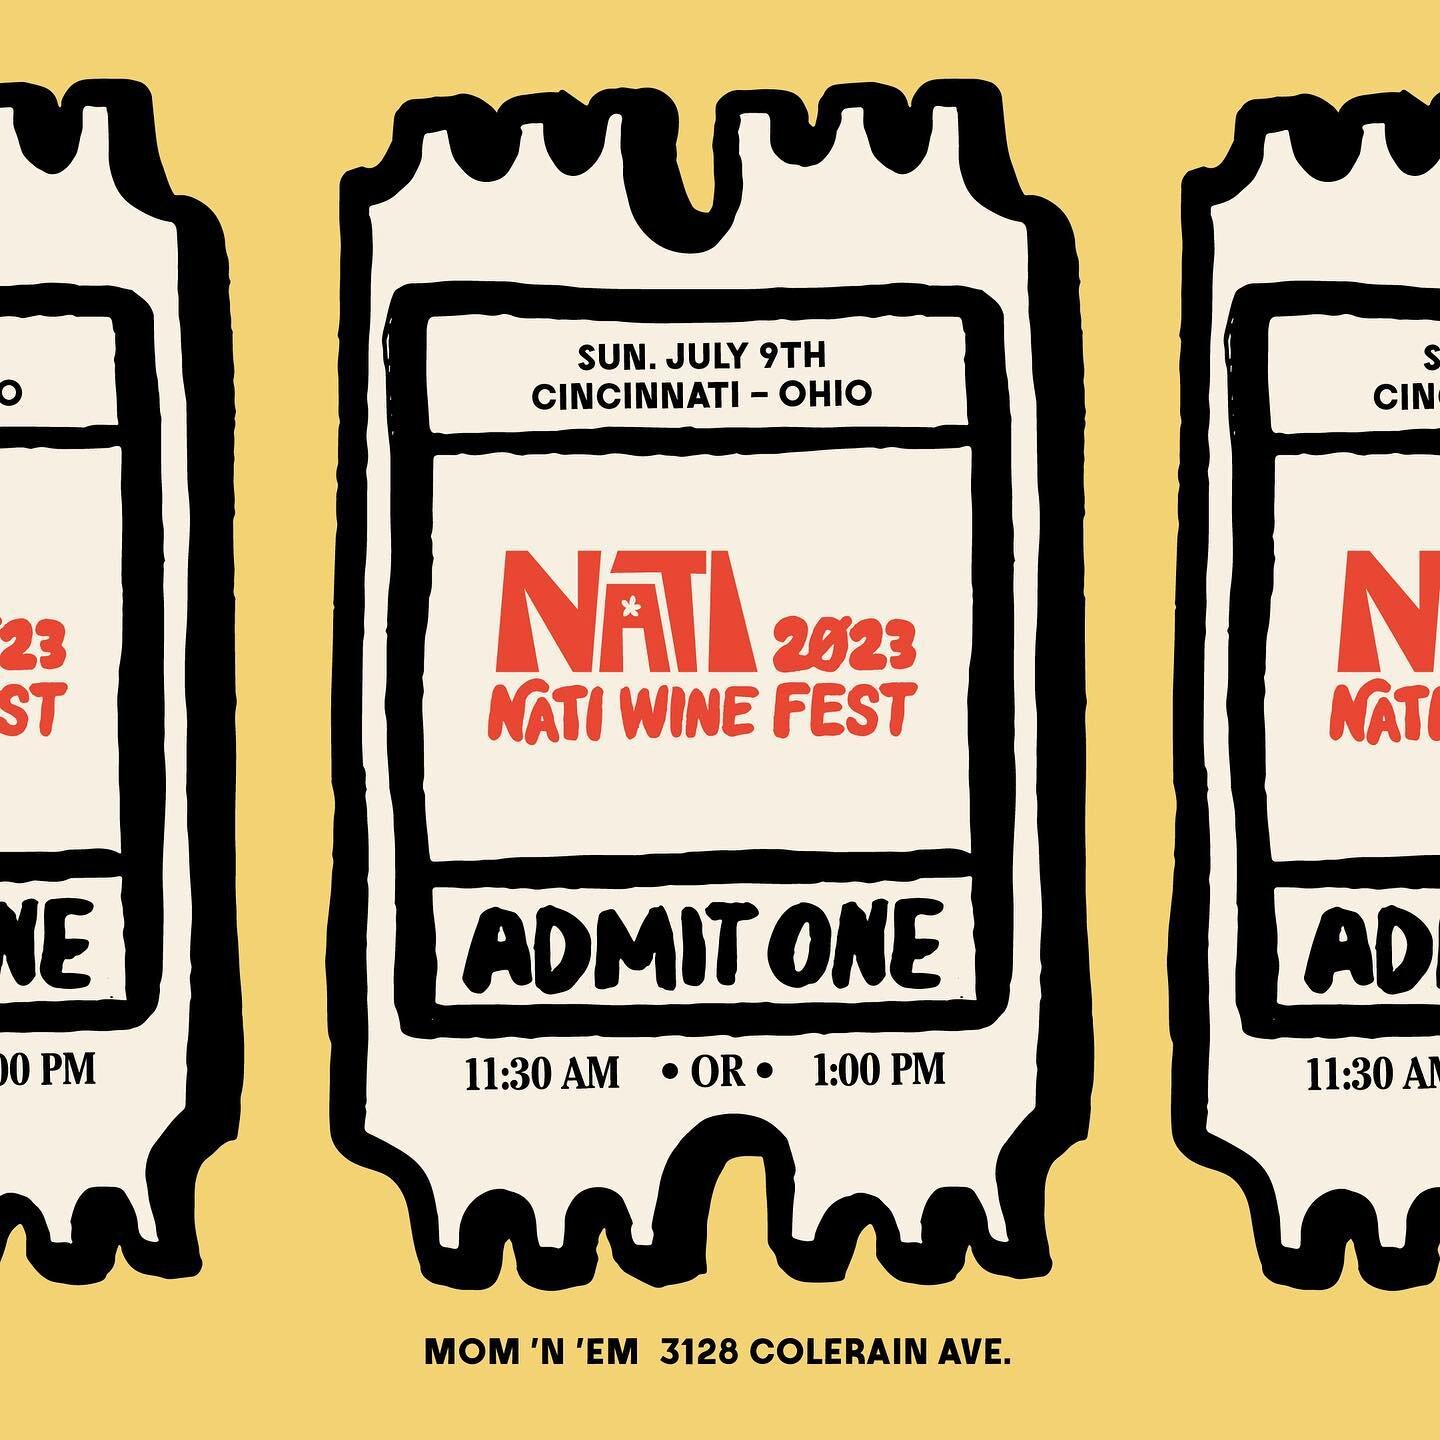 Nati Wine Fest 2023 tickets are LIVE. We&rsquo;ve been waiting months for this moment!
Click the link in our bio to learn more, and secure your spot. 

We are super excited for our lineup this year, and excited to have all of you back! 

#natiwinefes